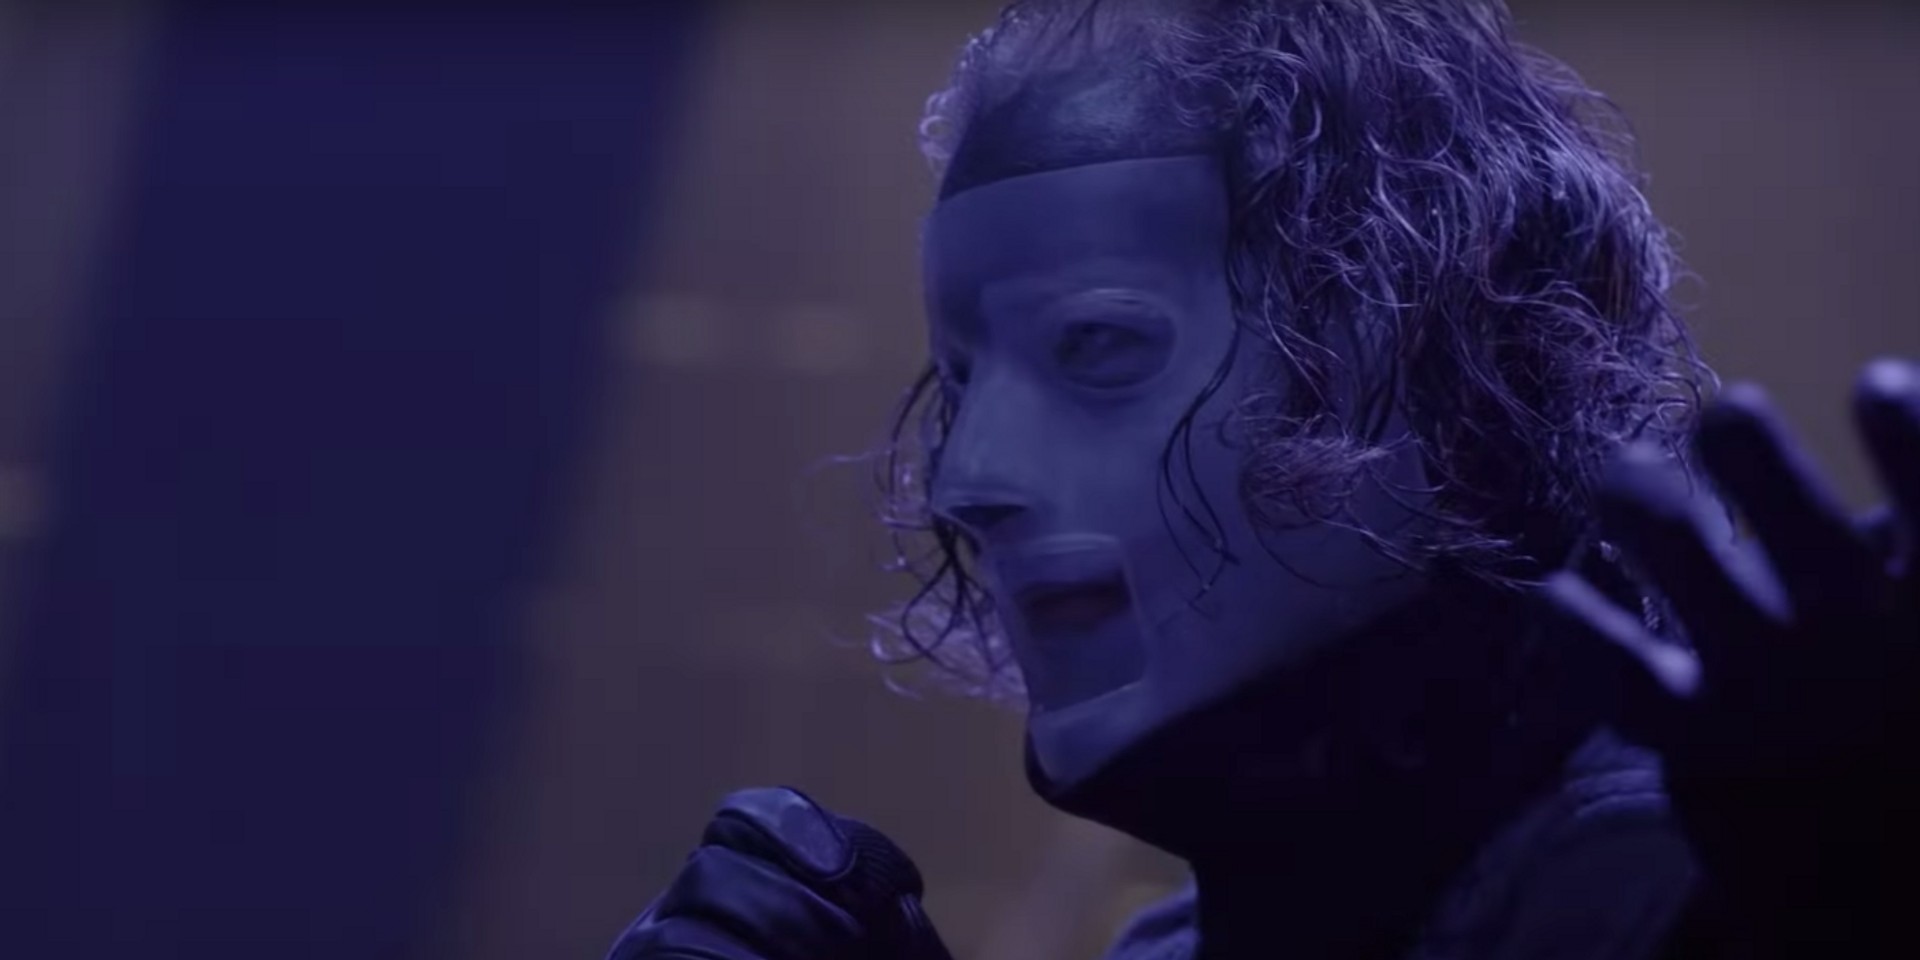 Slipknot releases new single, music video for 'Solway Firth' – watch 